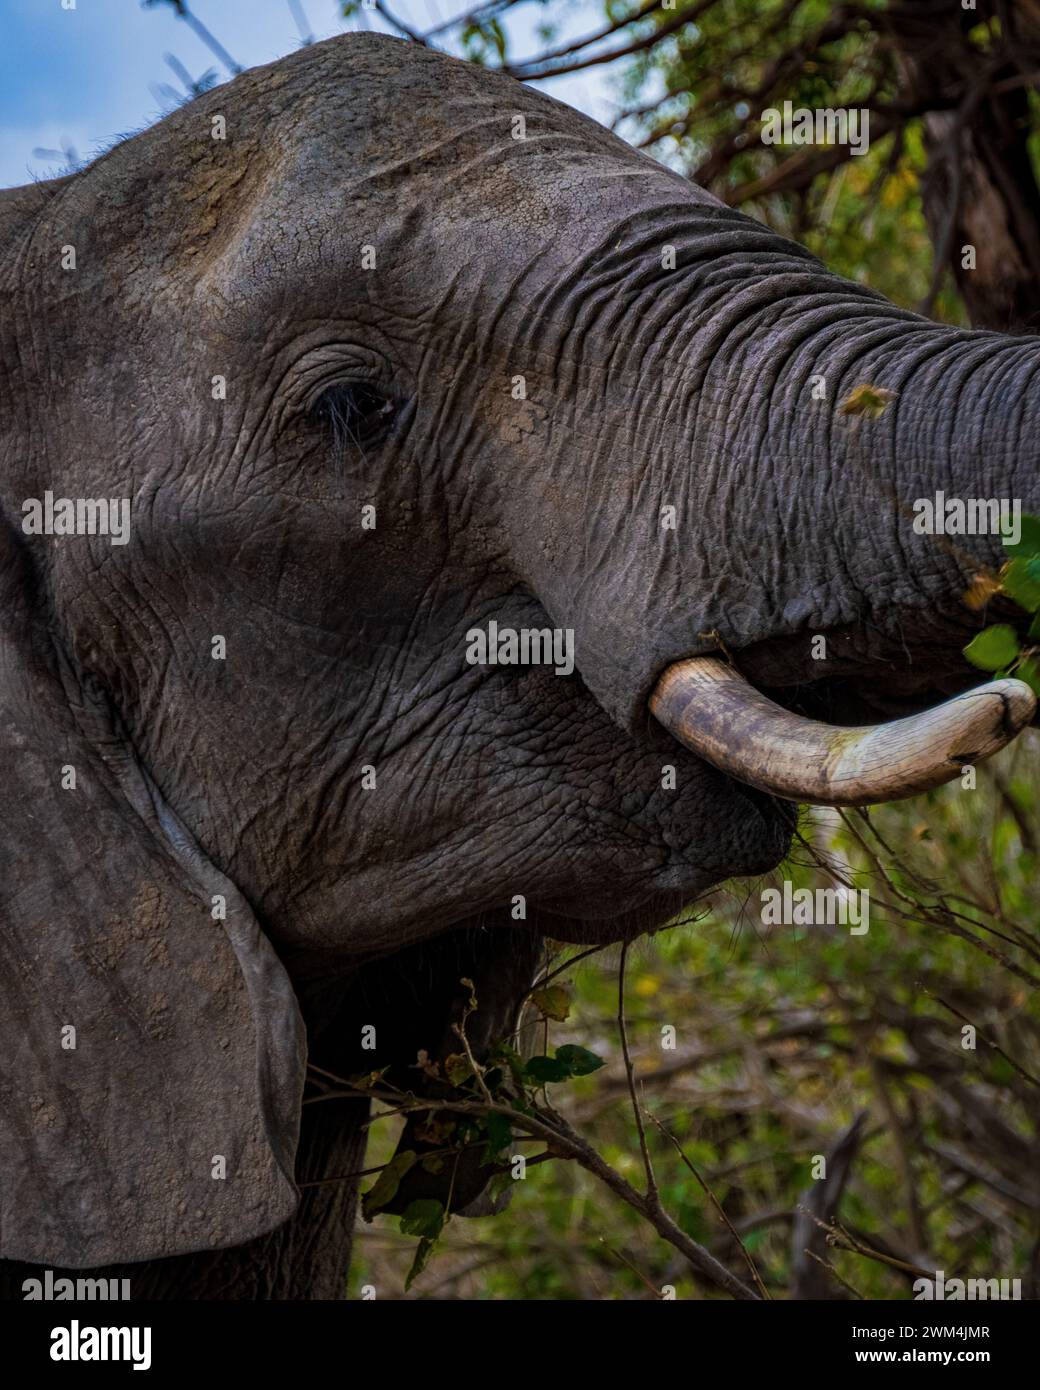 A closeup shot of an African elephant with its trunk raised, feeding on tree leaves Stock Photo